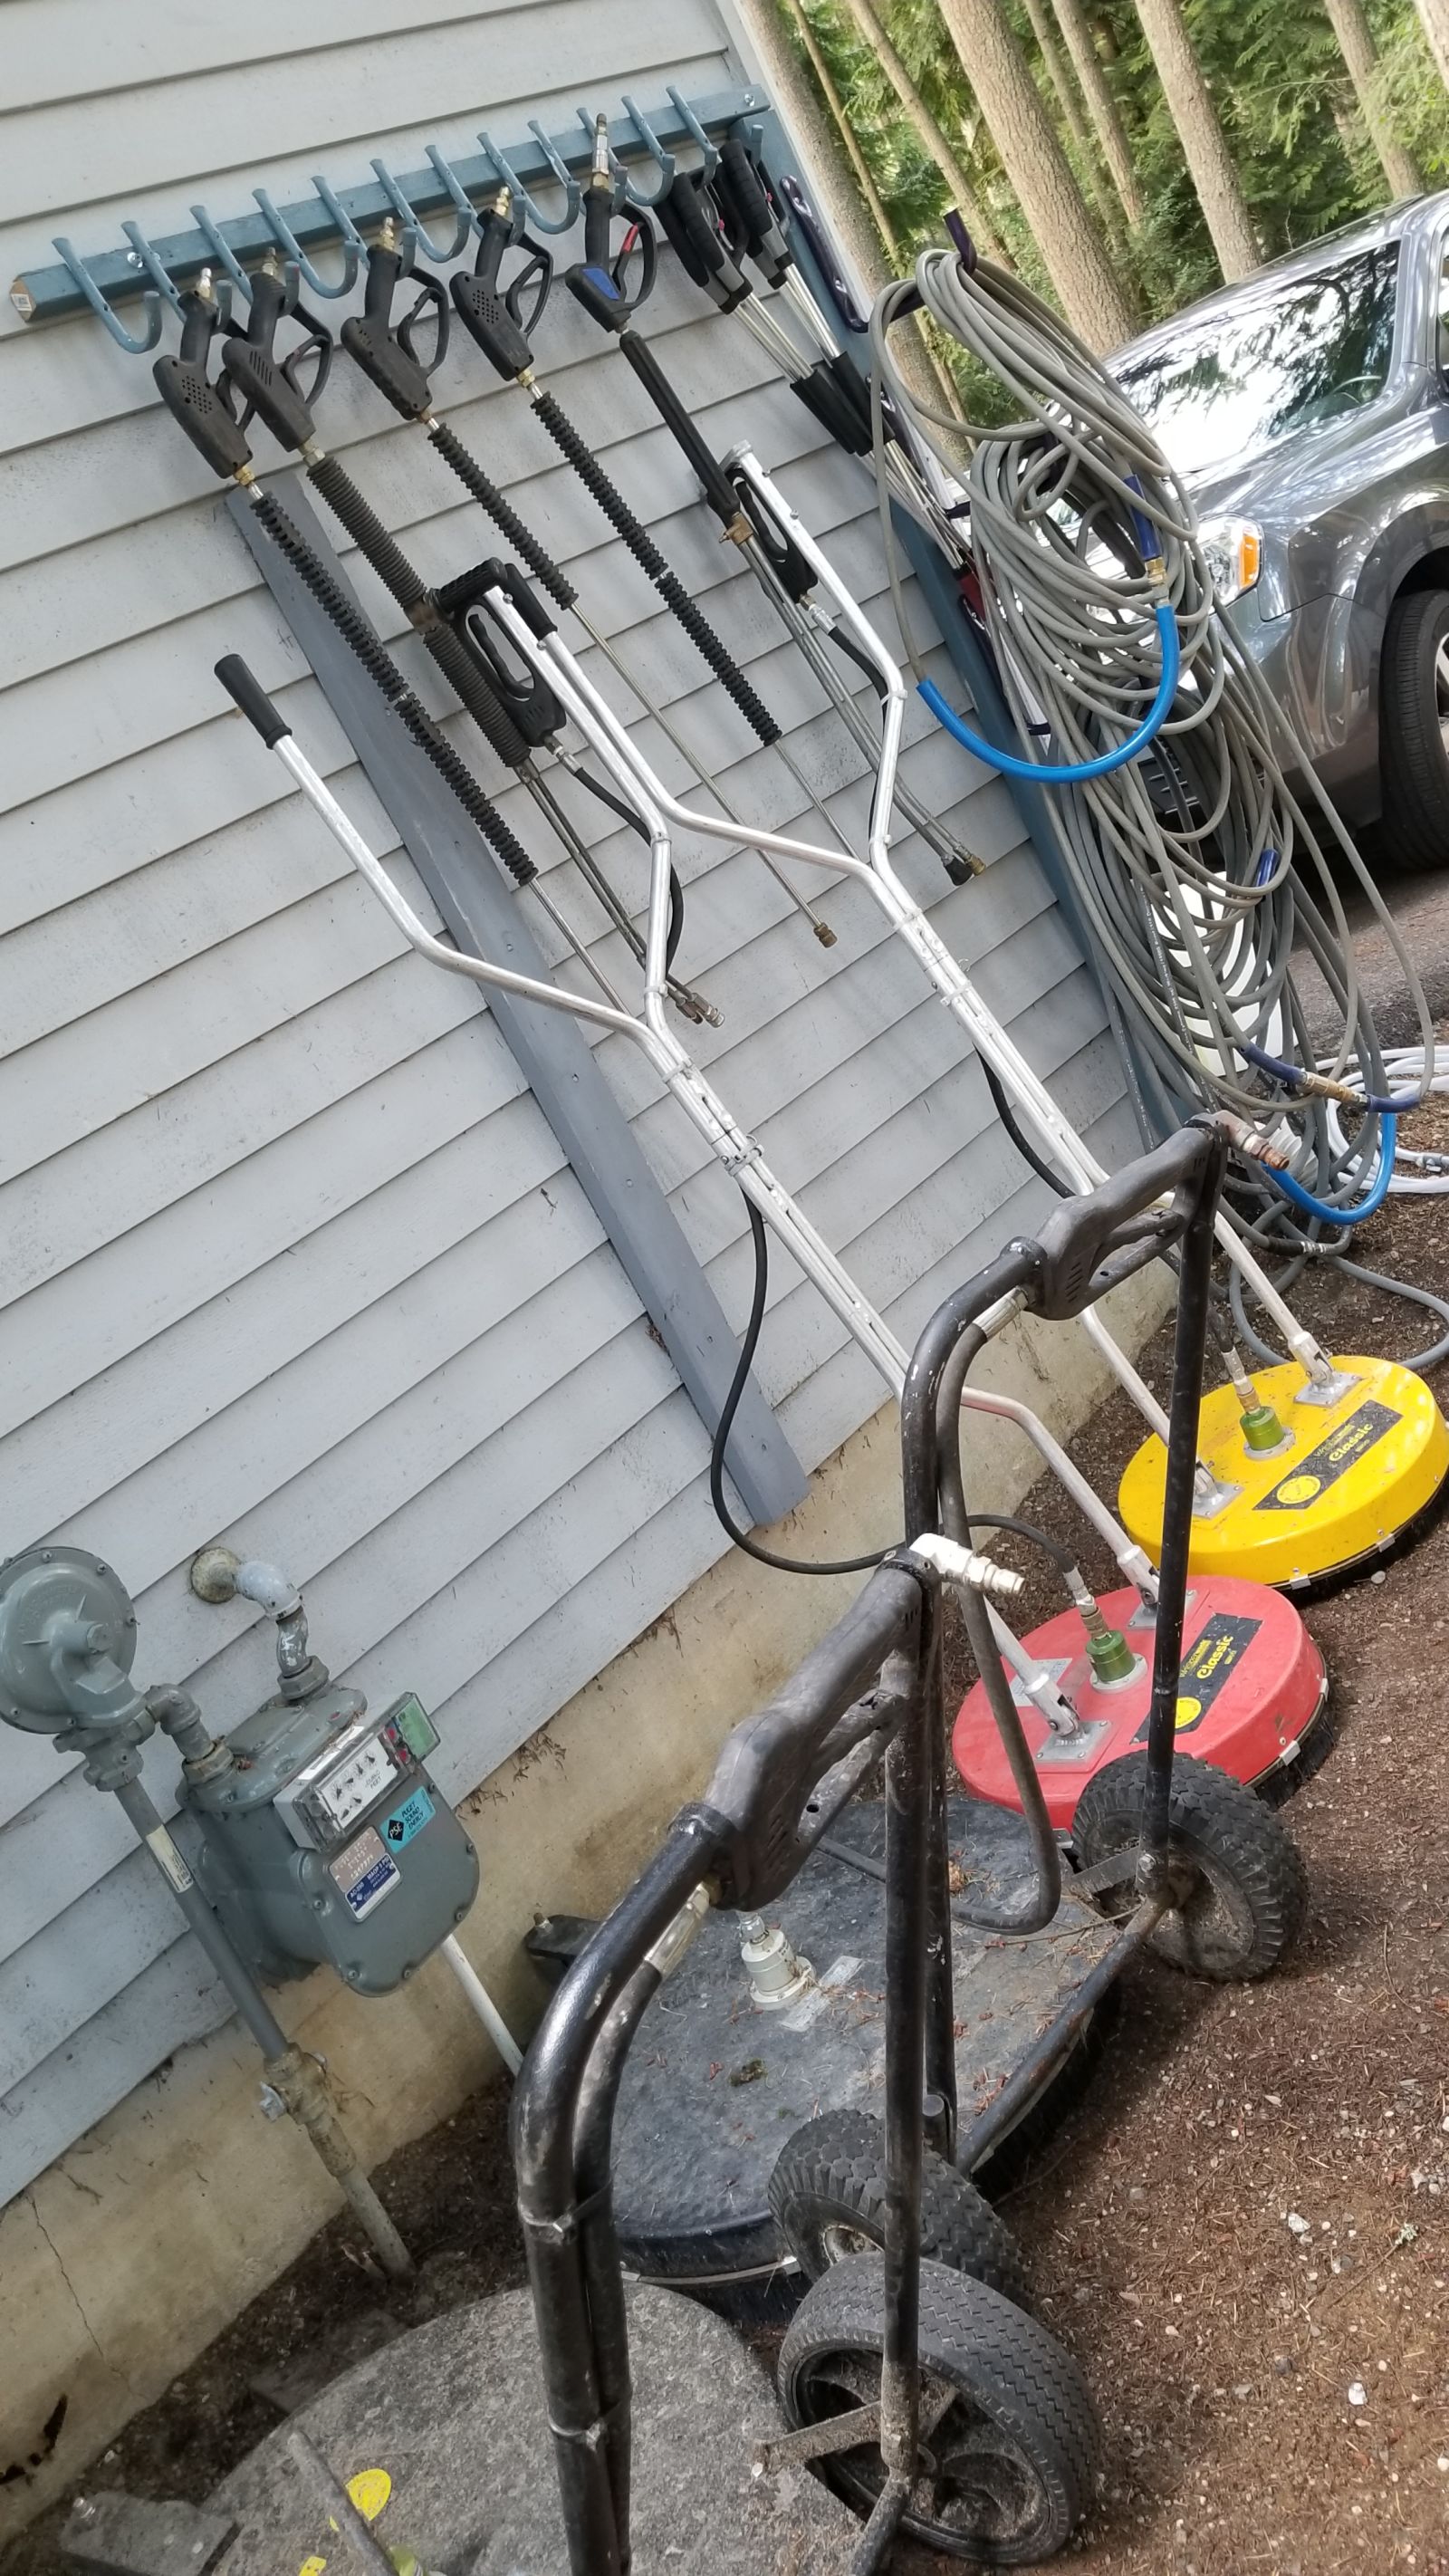 Within a year we’ll need to relocate to a bigger workplace, likely buying a large warehouse. For now... Little things like building a pressure washing station (you better believe I painted it) help keep us from outgrowing our current place TOO quickly. 